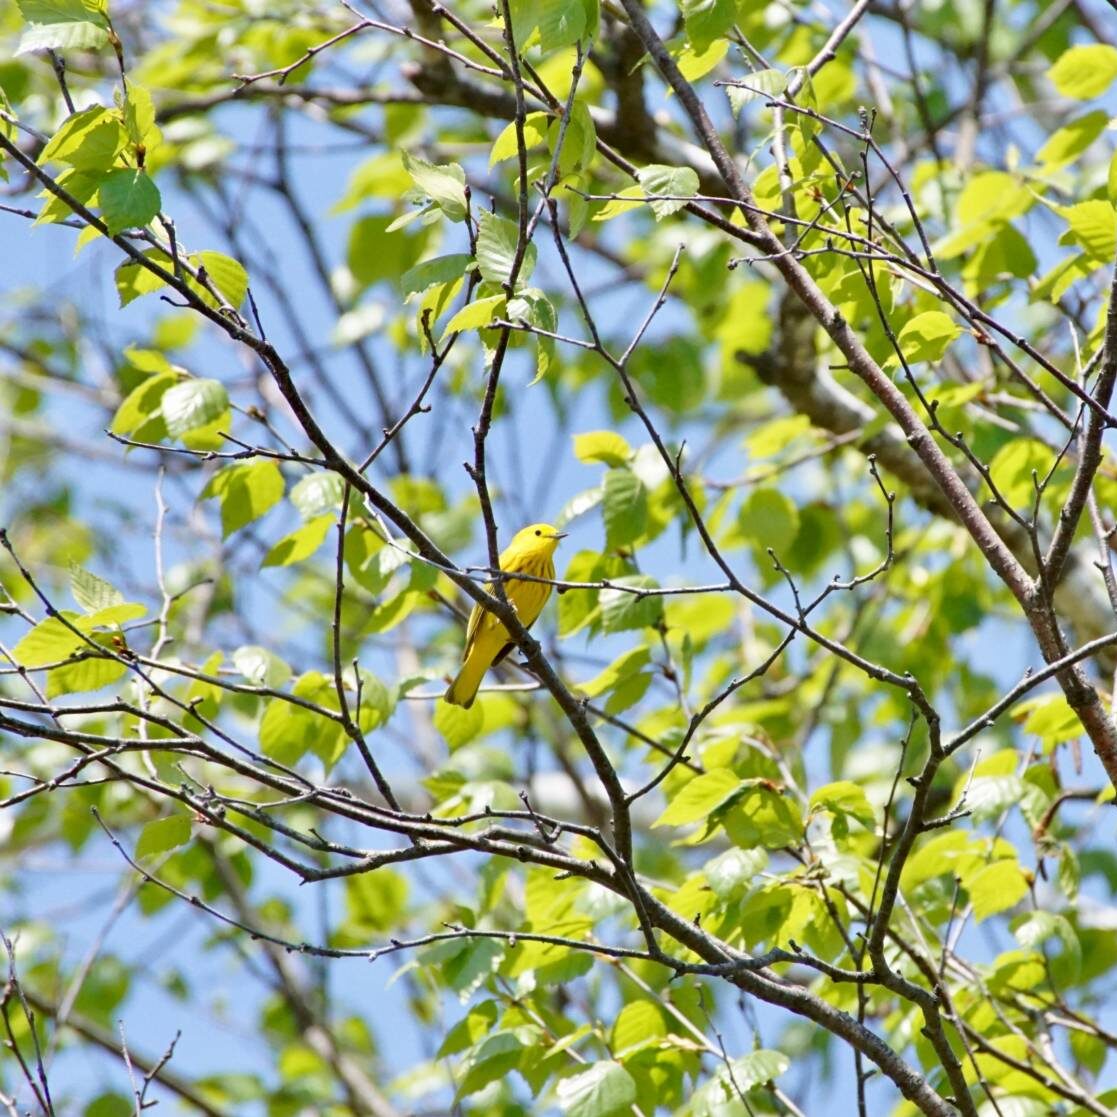 a yellow warbler sits on a branch in a tree with green leaves